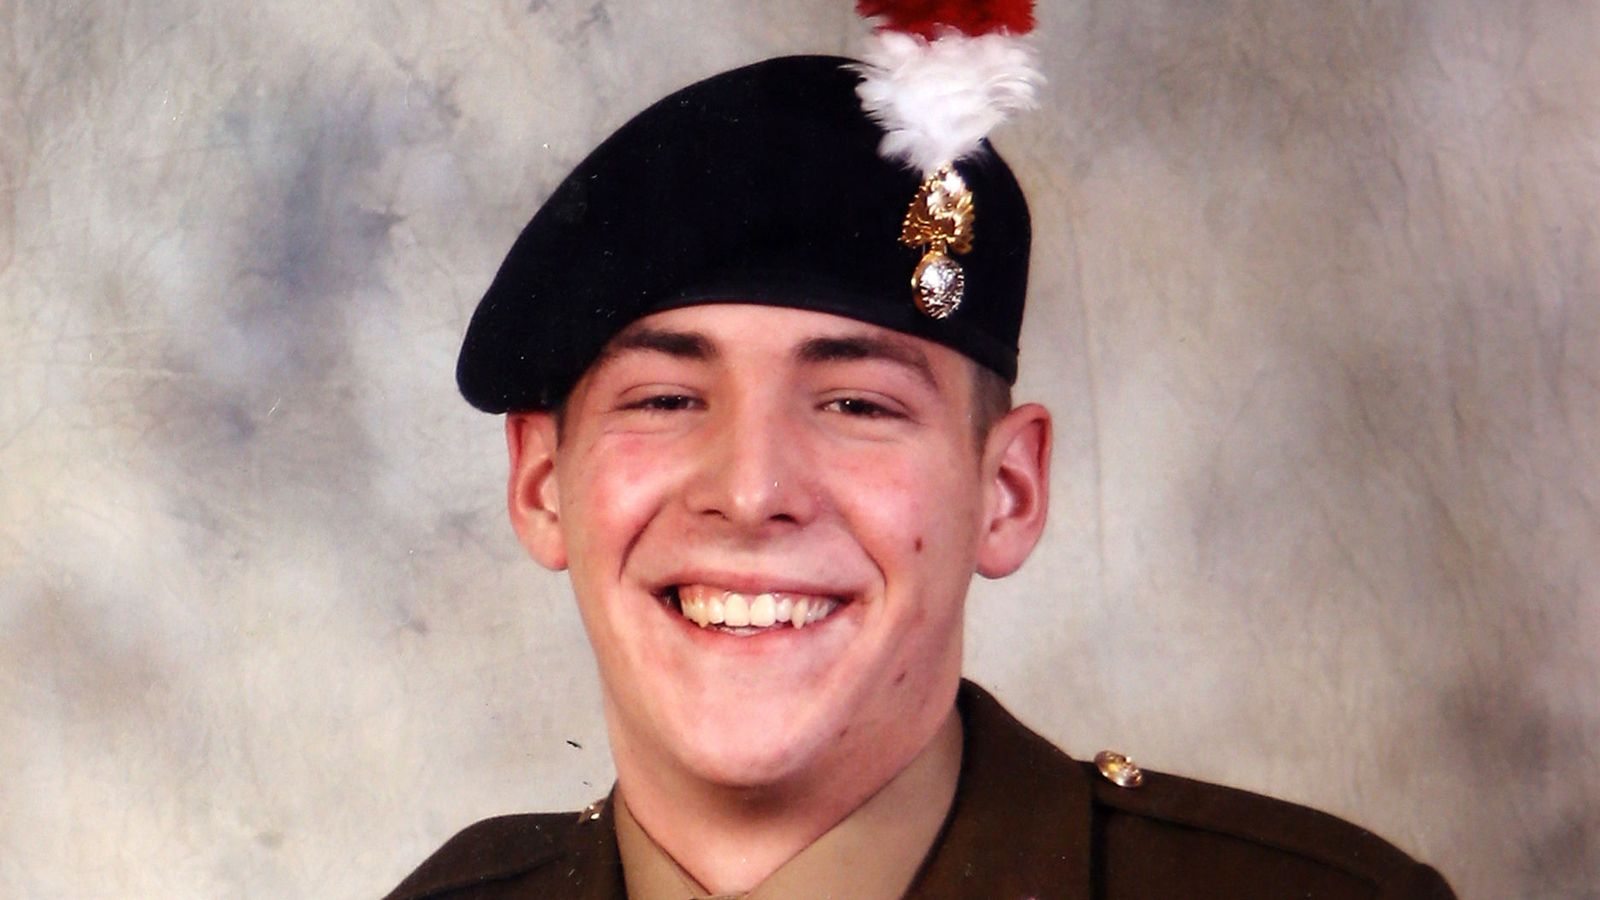 Lee Rigby's son speaks out for first time since his dad was murdered 10 years ago